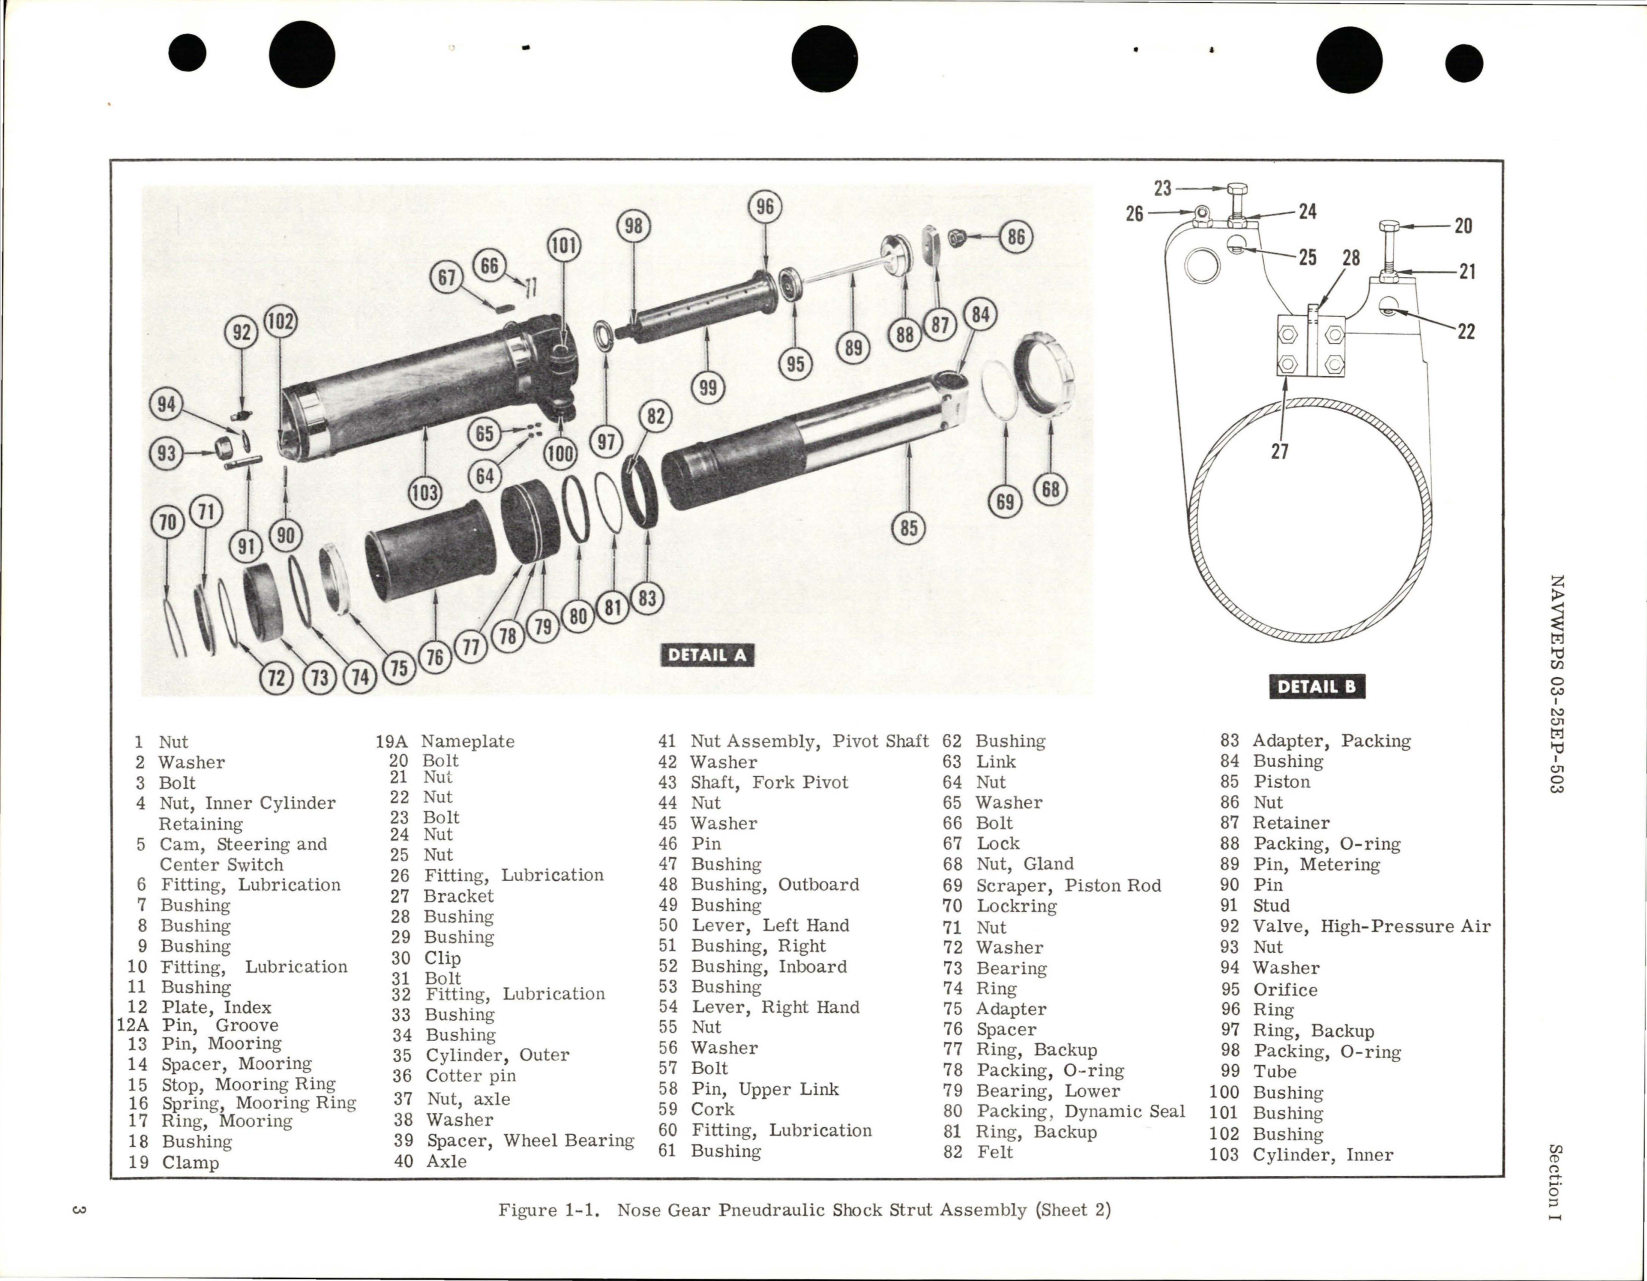 Sample page 5 from AirCorps Library document: Overhaul Instructions for Nose Gear Pneudraulic Shock Strut Assembly - Part 548600 Series